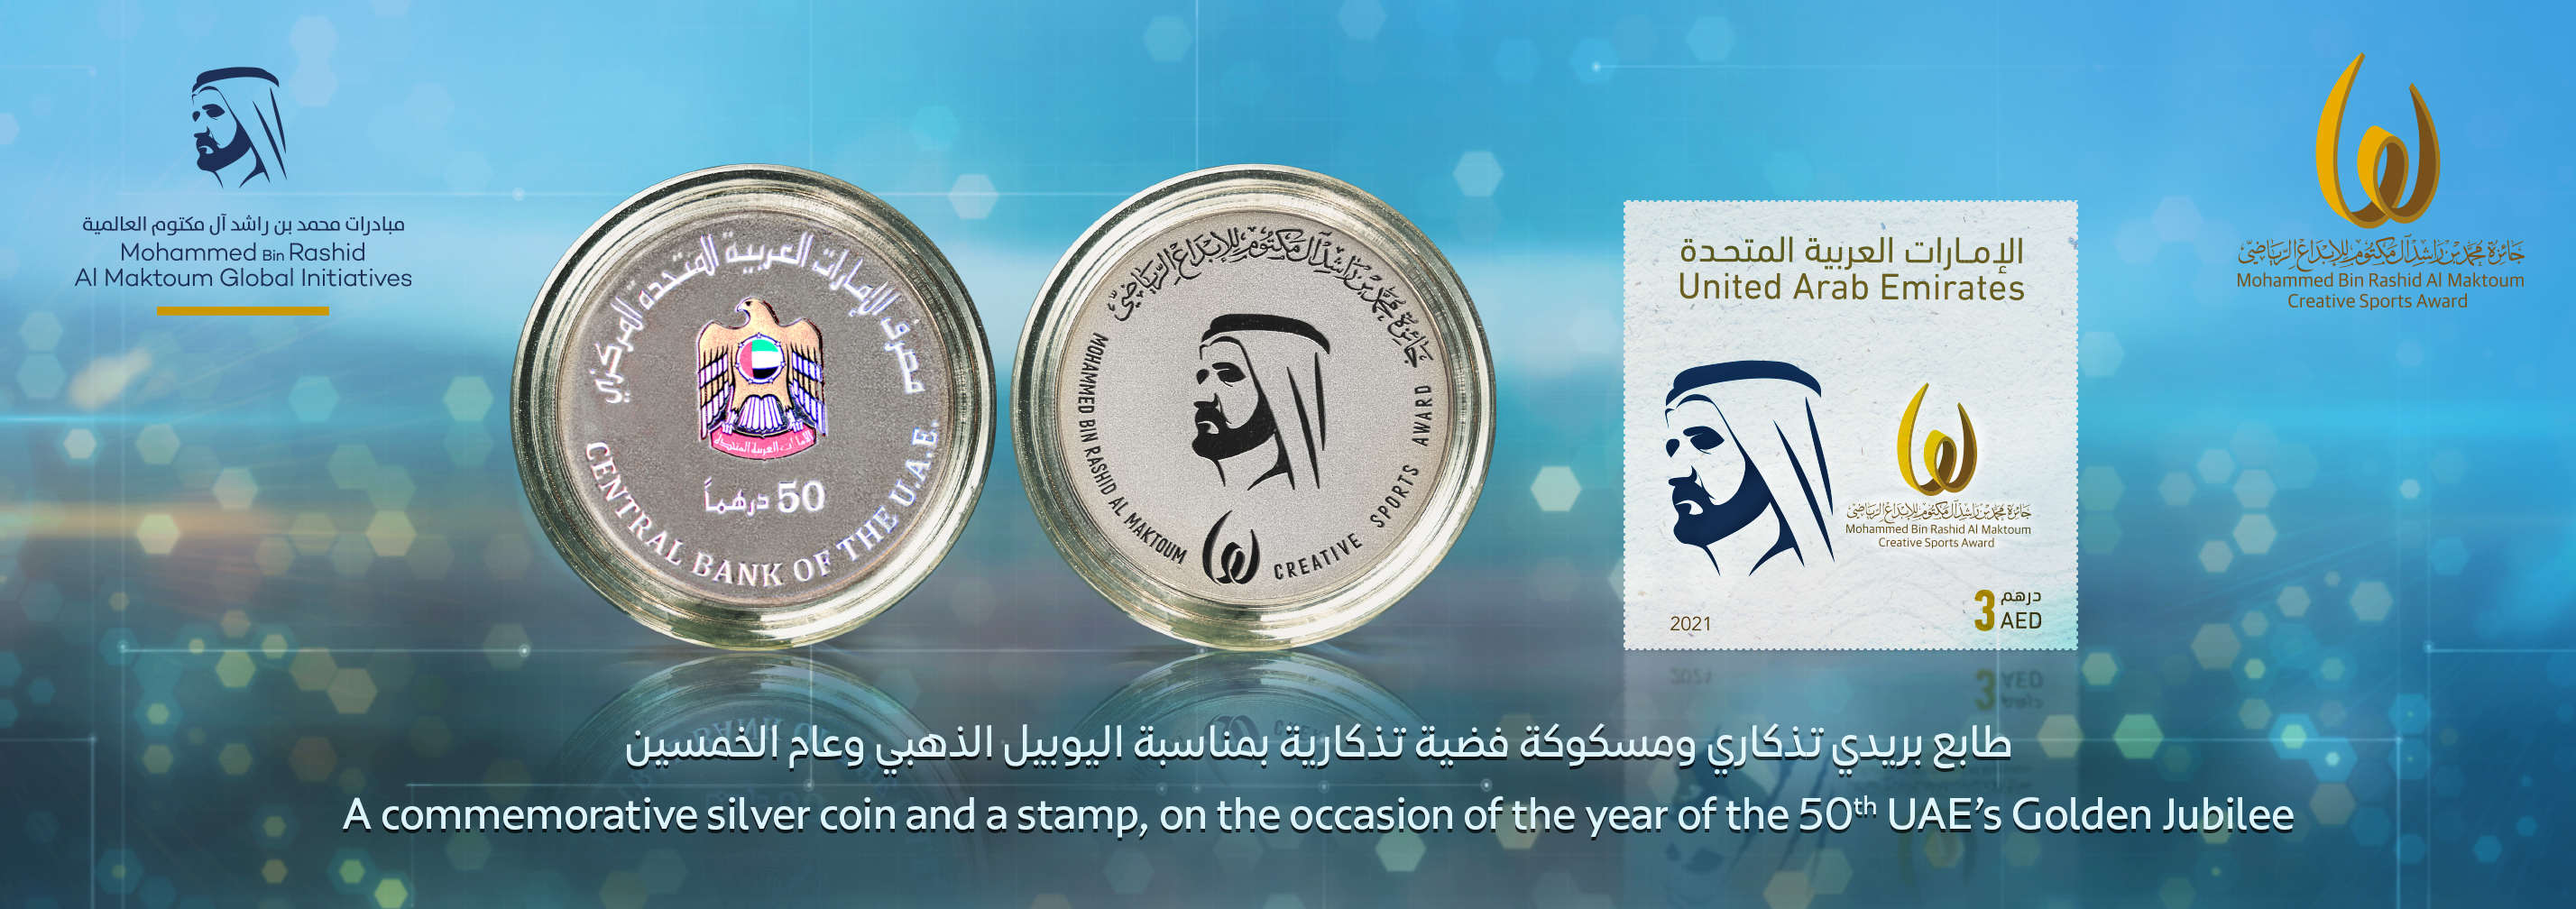 UAE Award Coin and stamp